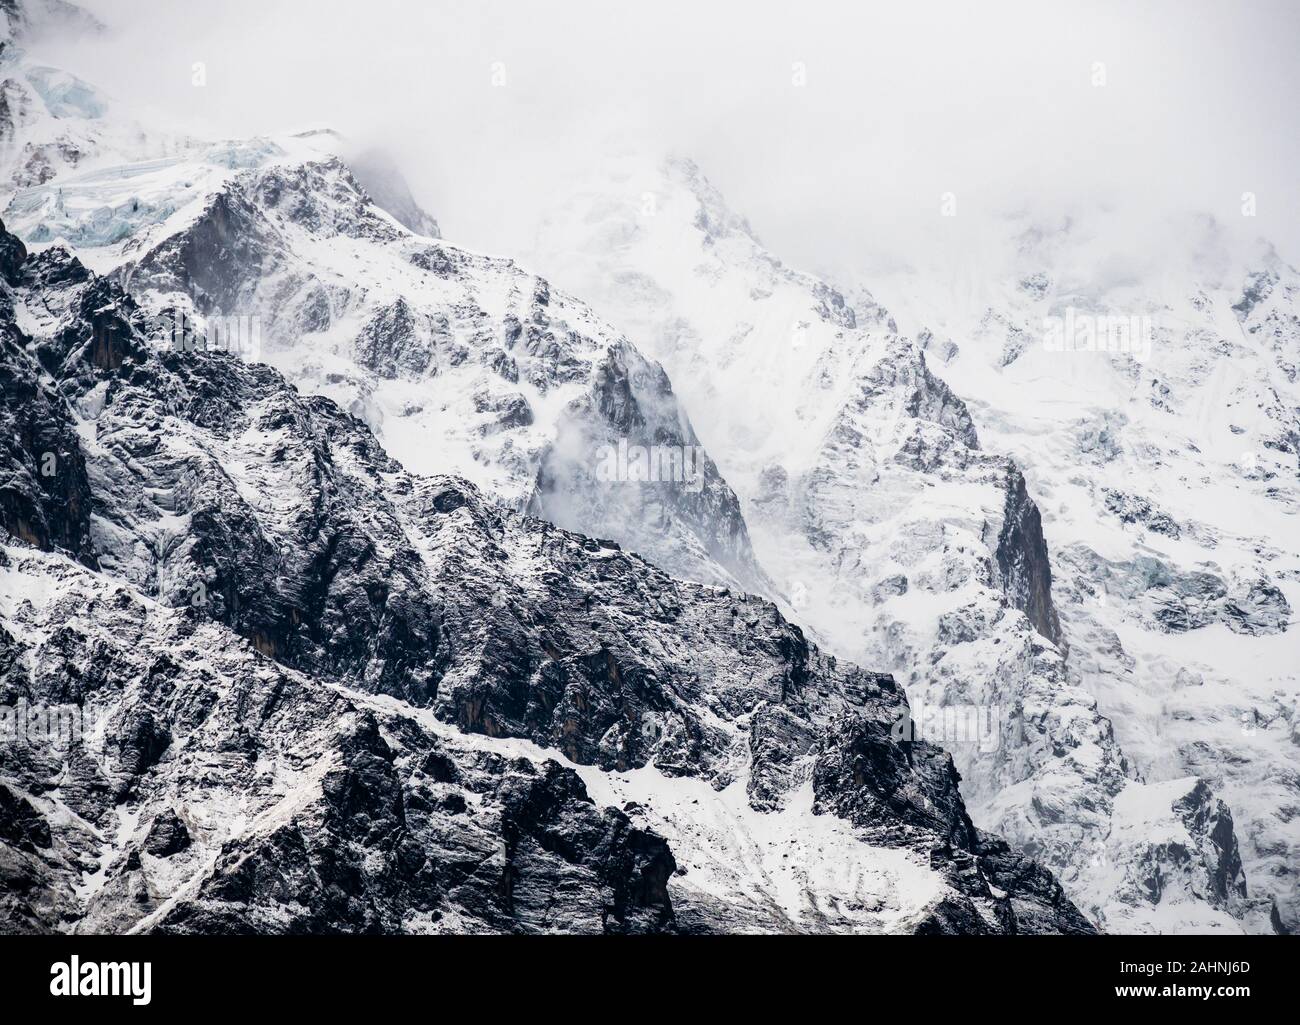 Himalayan Mountains In Fog Full Frame Of Snowy Mountain Ridges And Exposed Rock Stock Photo Alamy